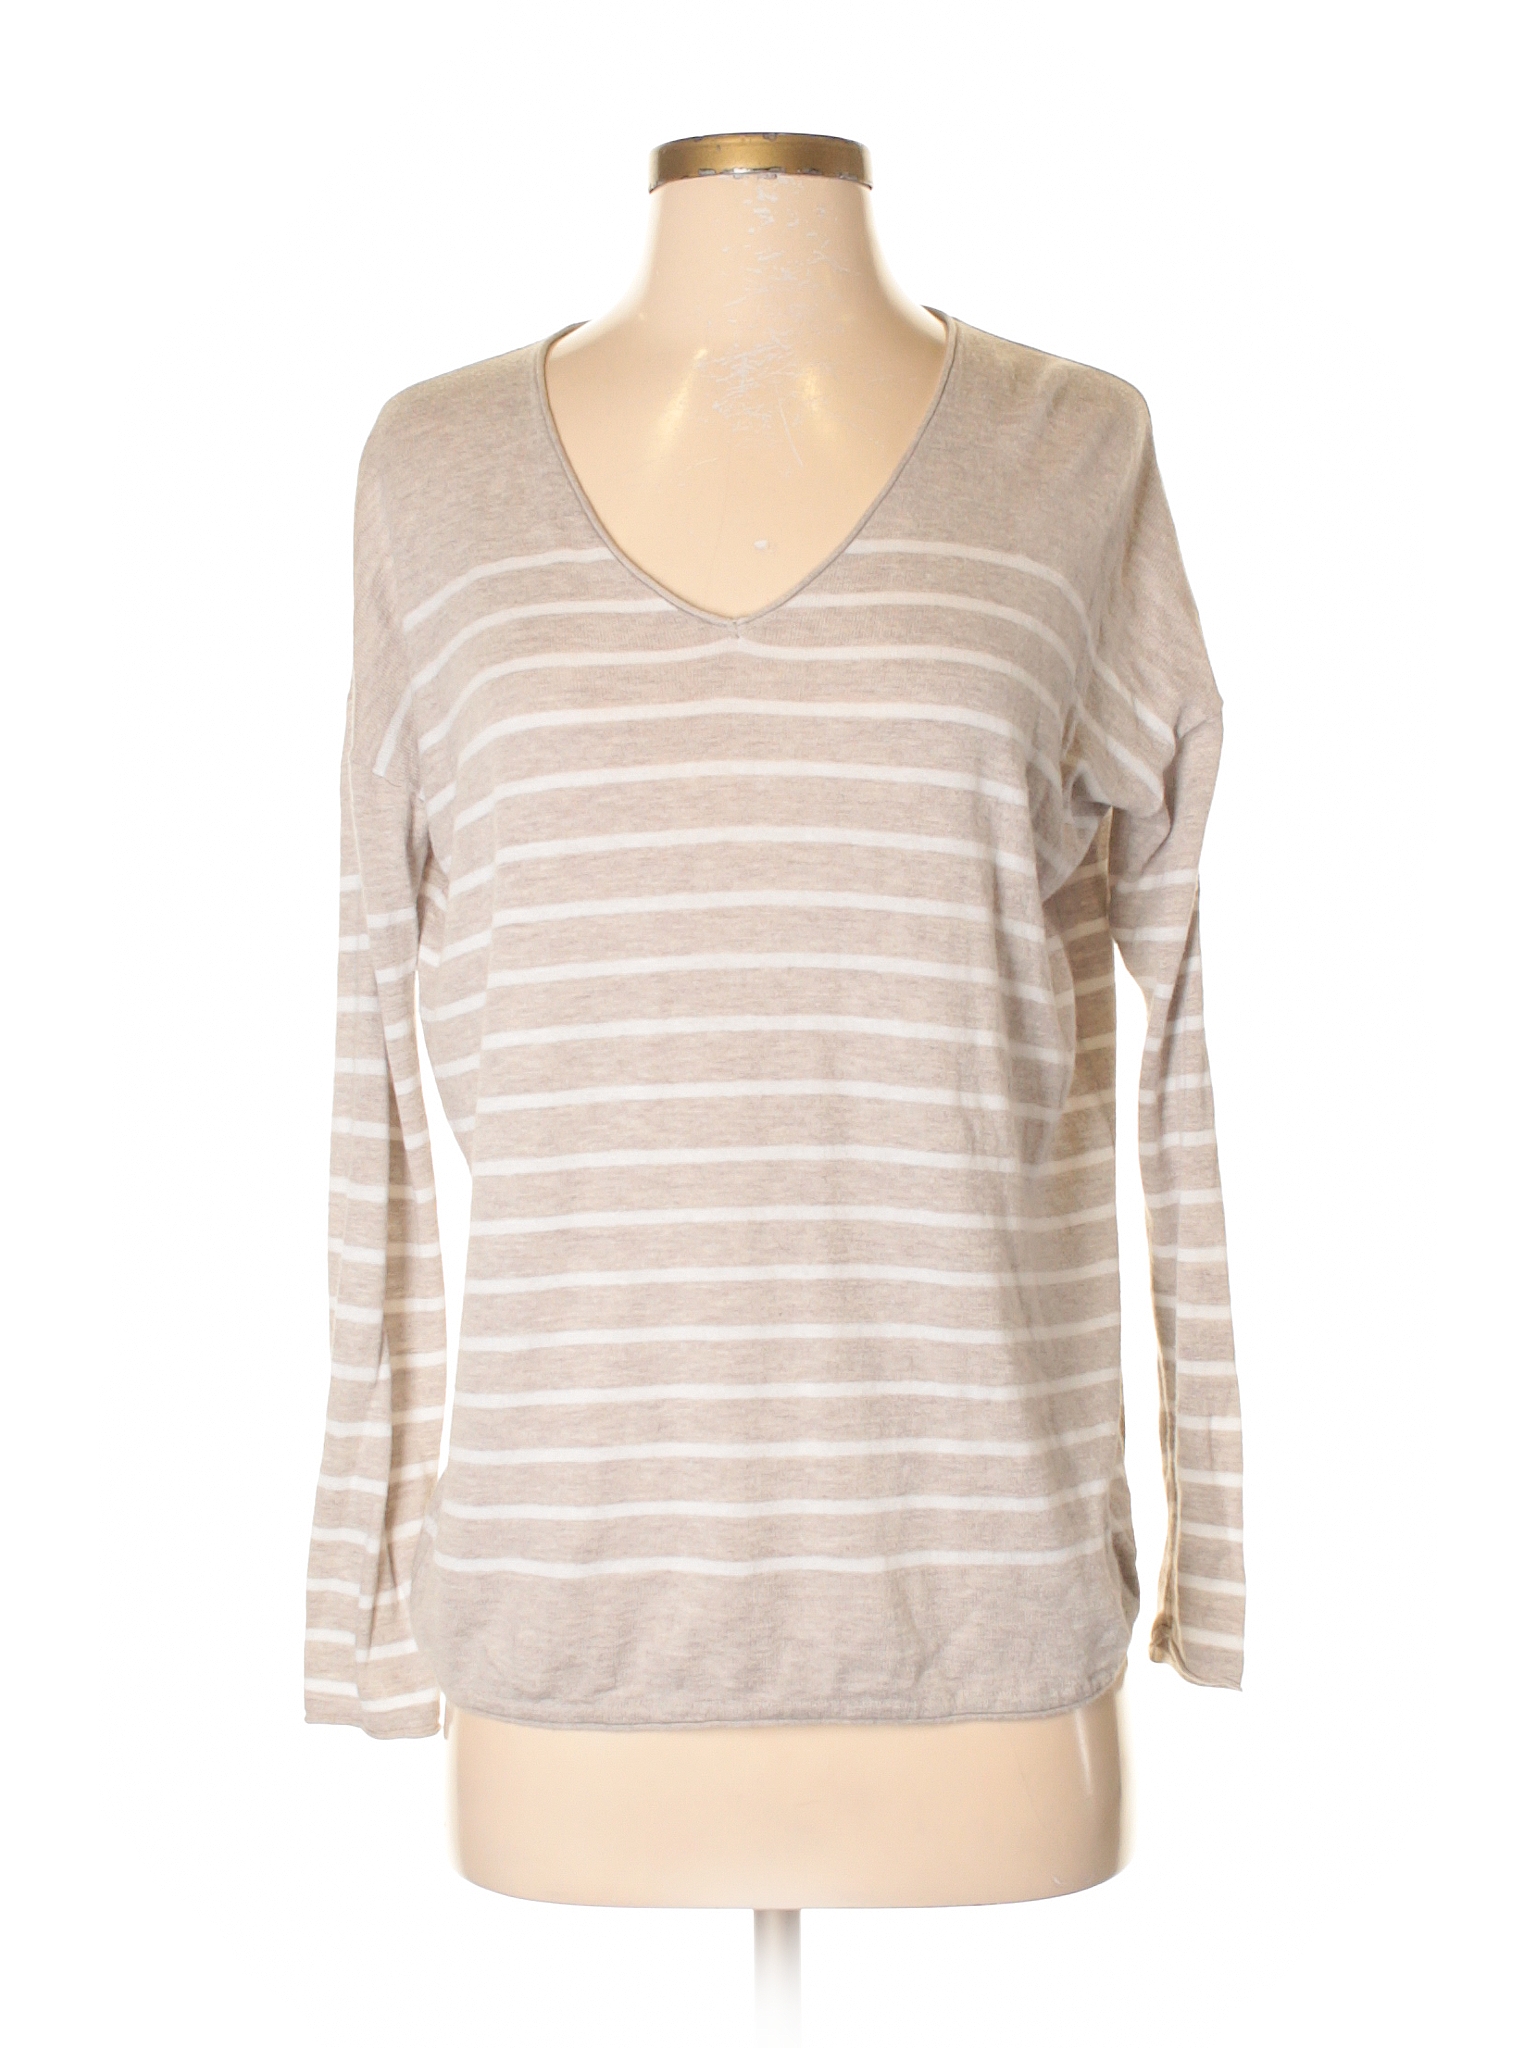 Old Navy Stripes Tan Long Sleeve Top Size S (Petite) - 93% off | thredUP